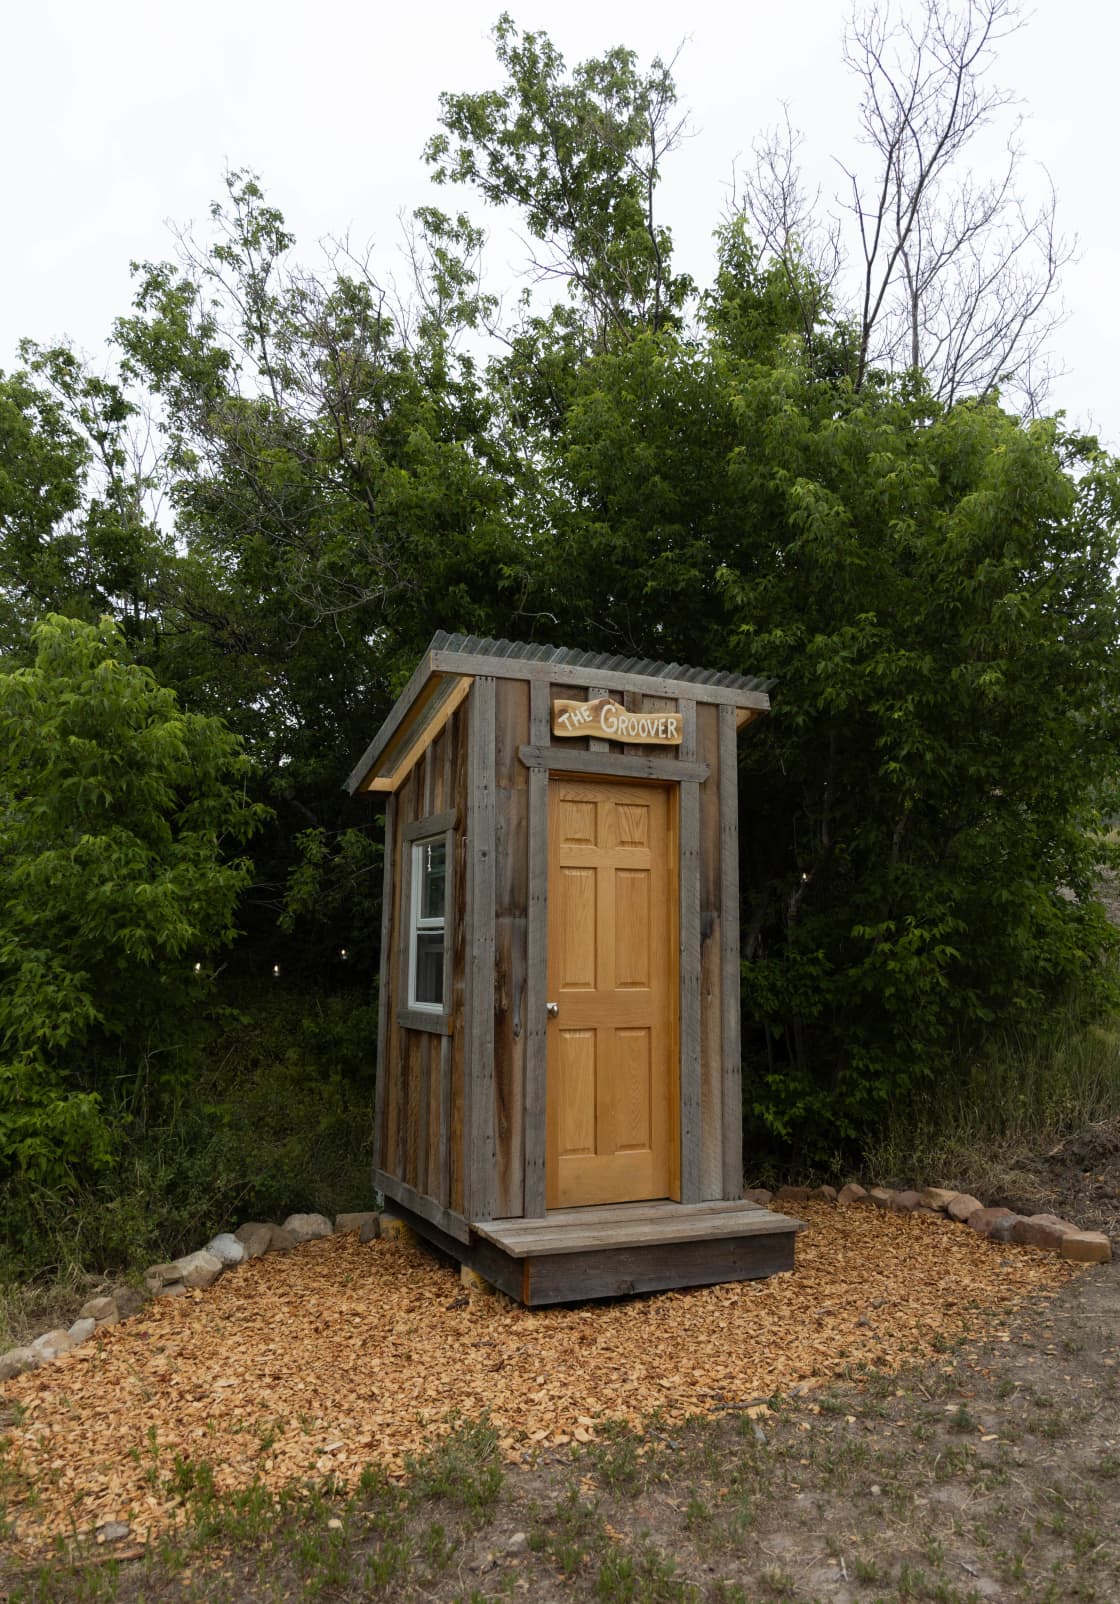 The Groover: a primitive (and very comfortable) composting toilet system following the "Humanure" method. That's right, we compost your poop!